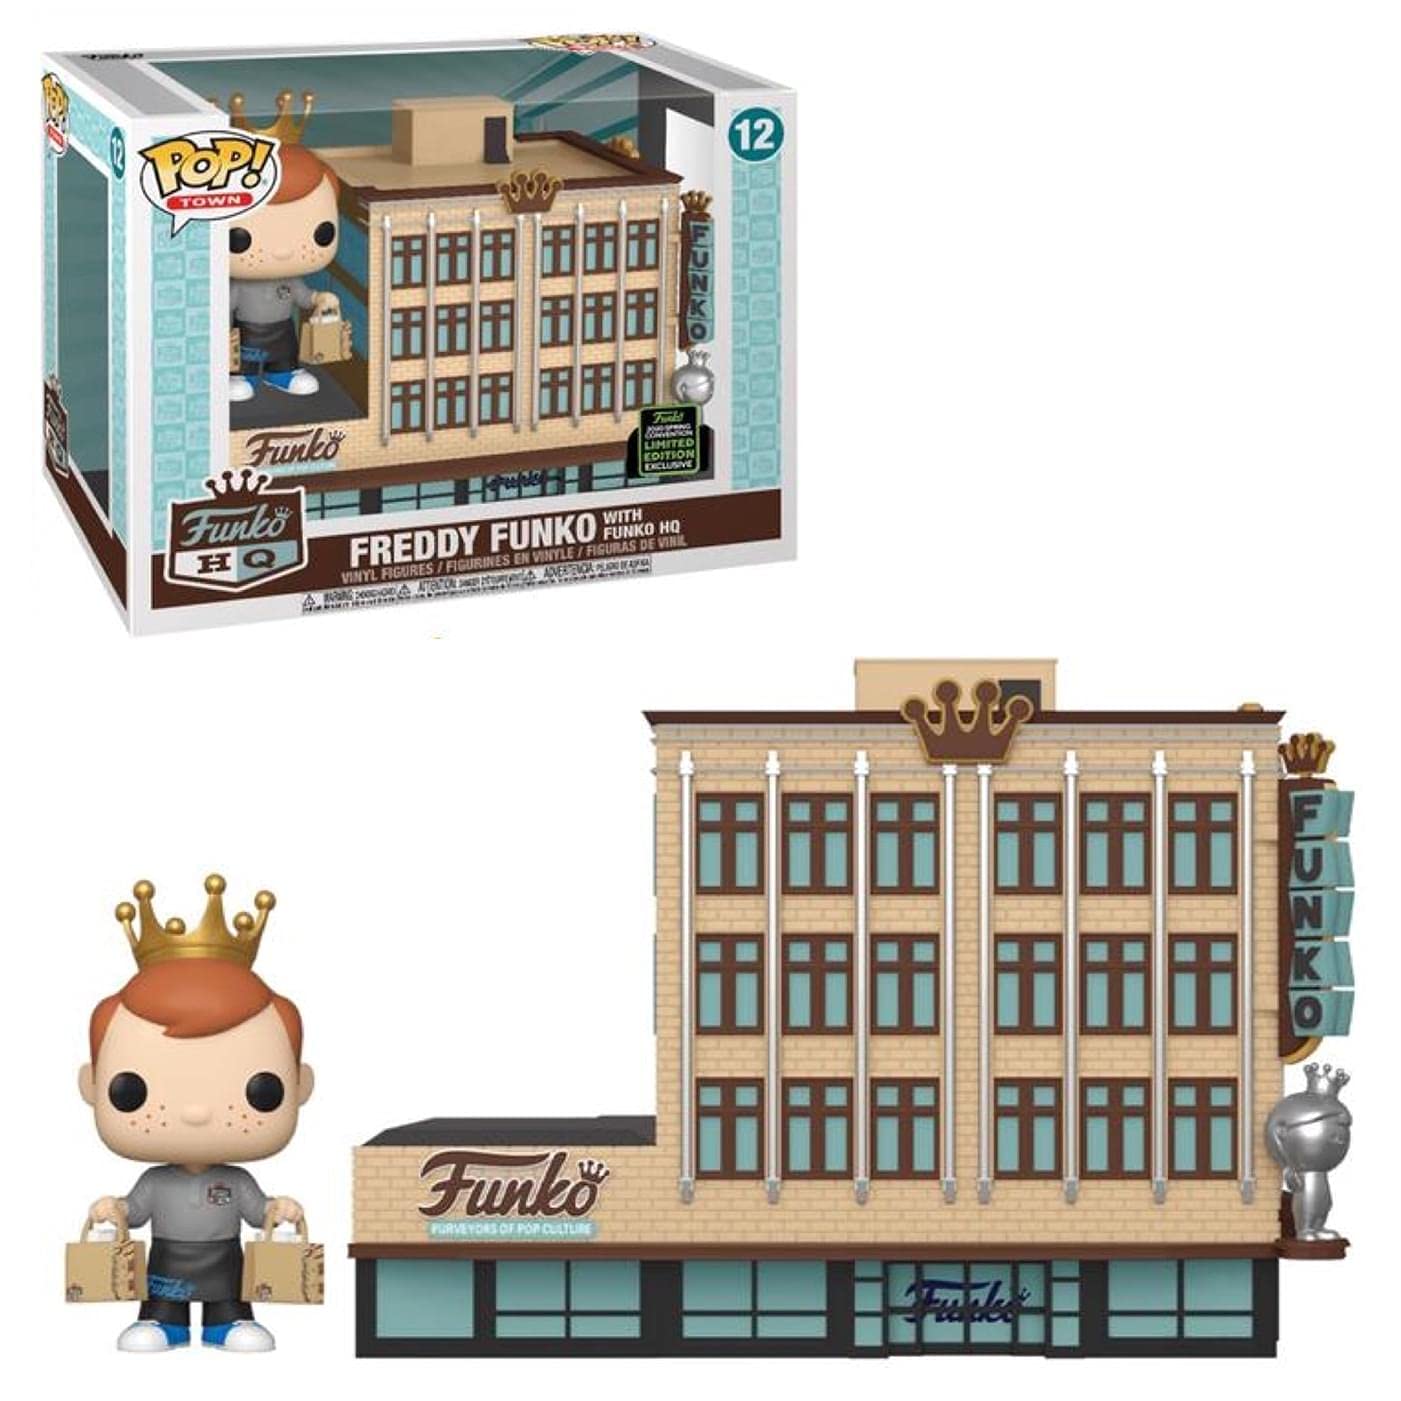 Funko POP! Town Freddy Funko with Funko HQ #12 Spring 2020 SHARED Limited Edition Exclusive